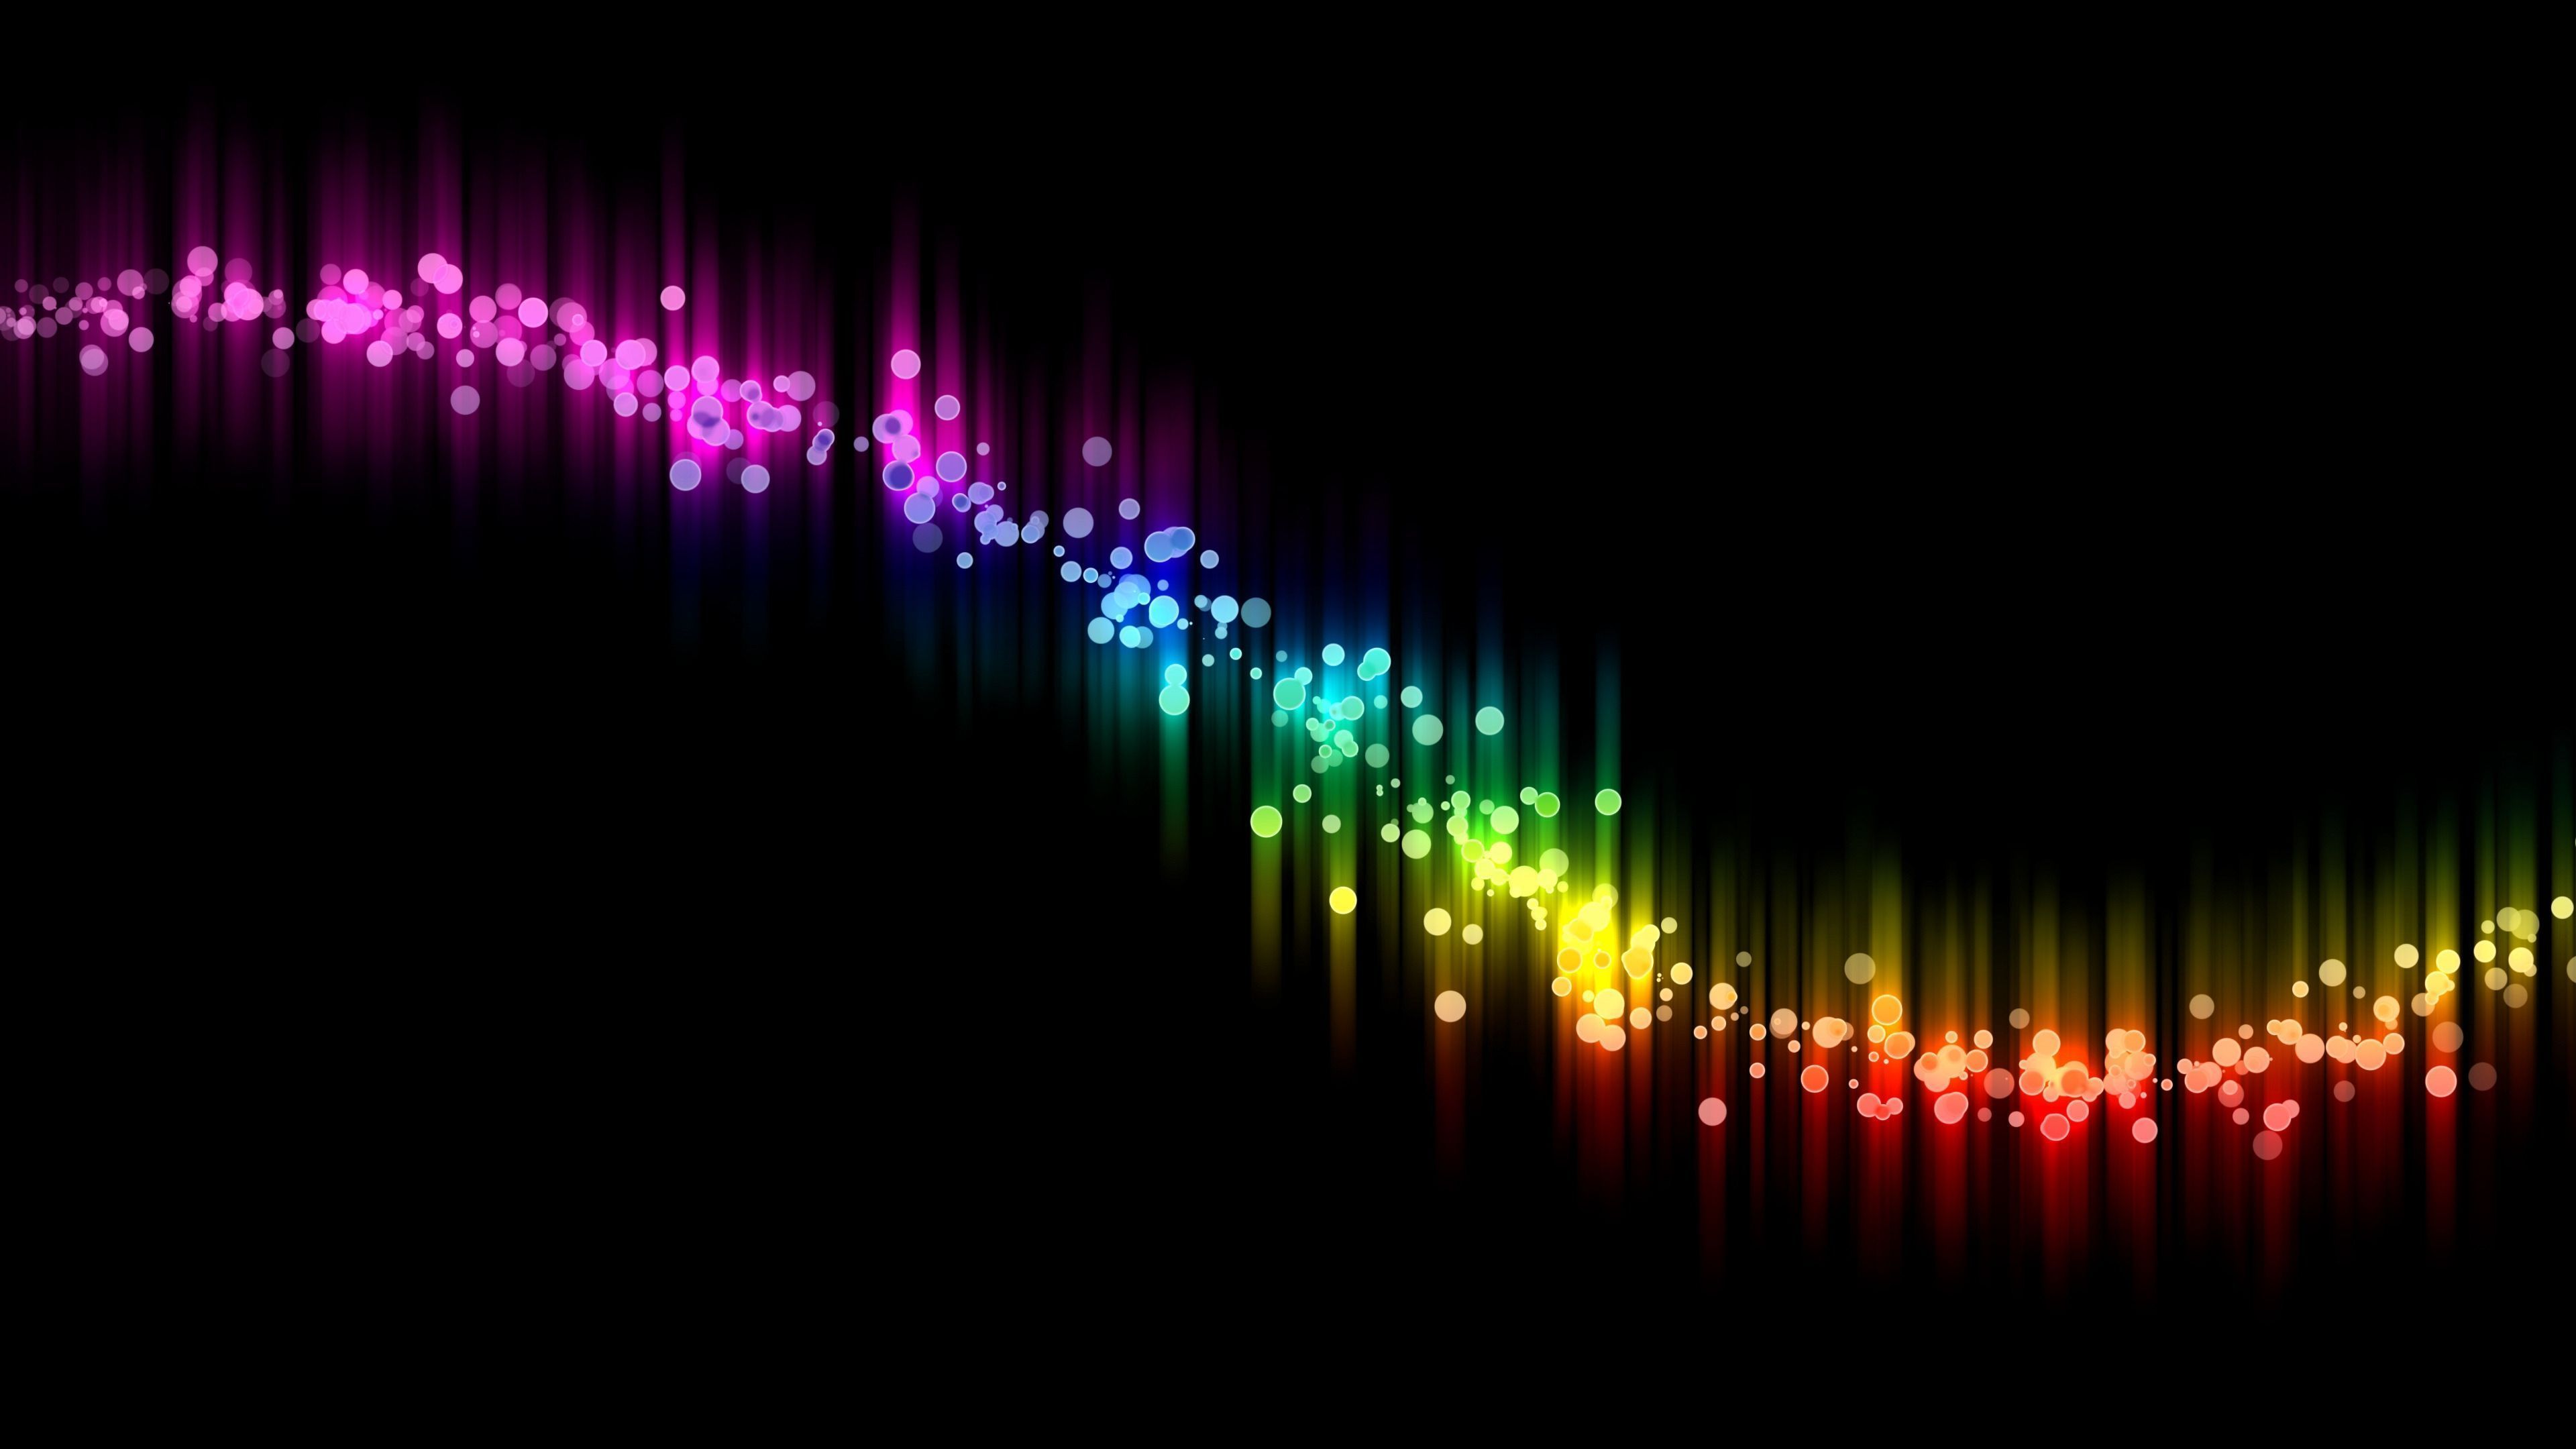 Download Wallpaper 3840x2160 Abstract, Black, Colorful, Curve 4K ...